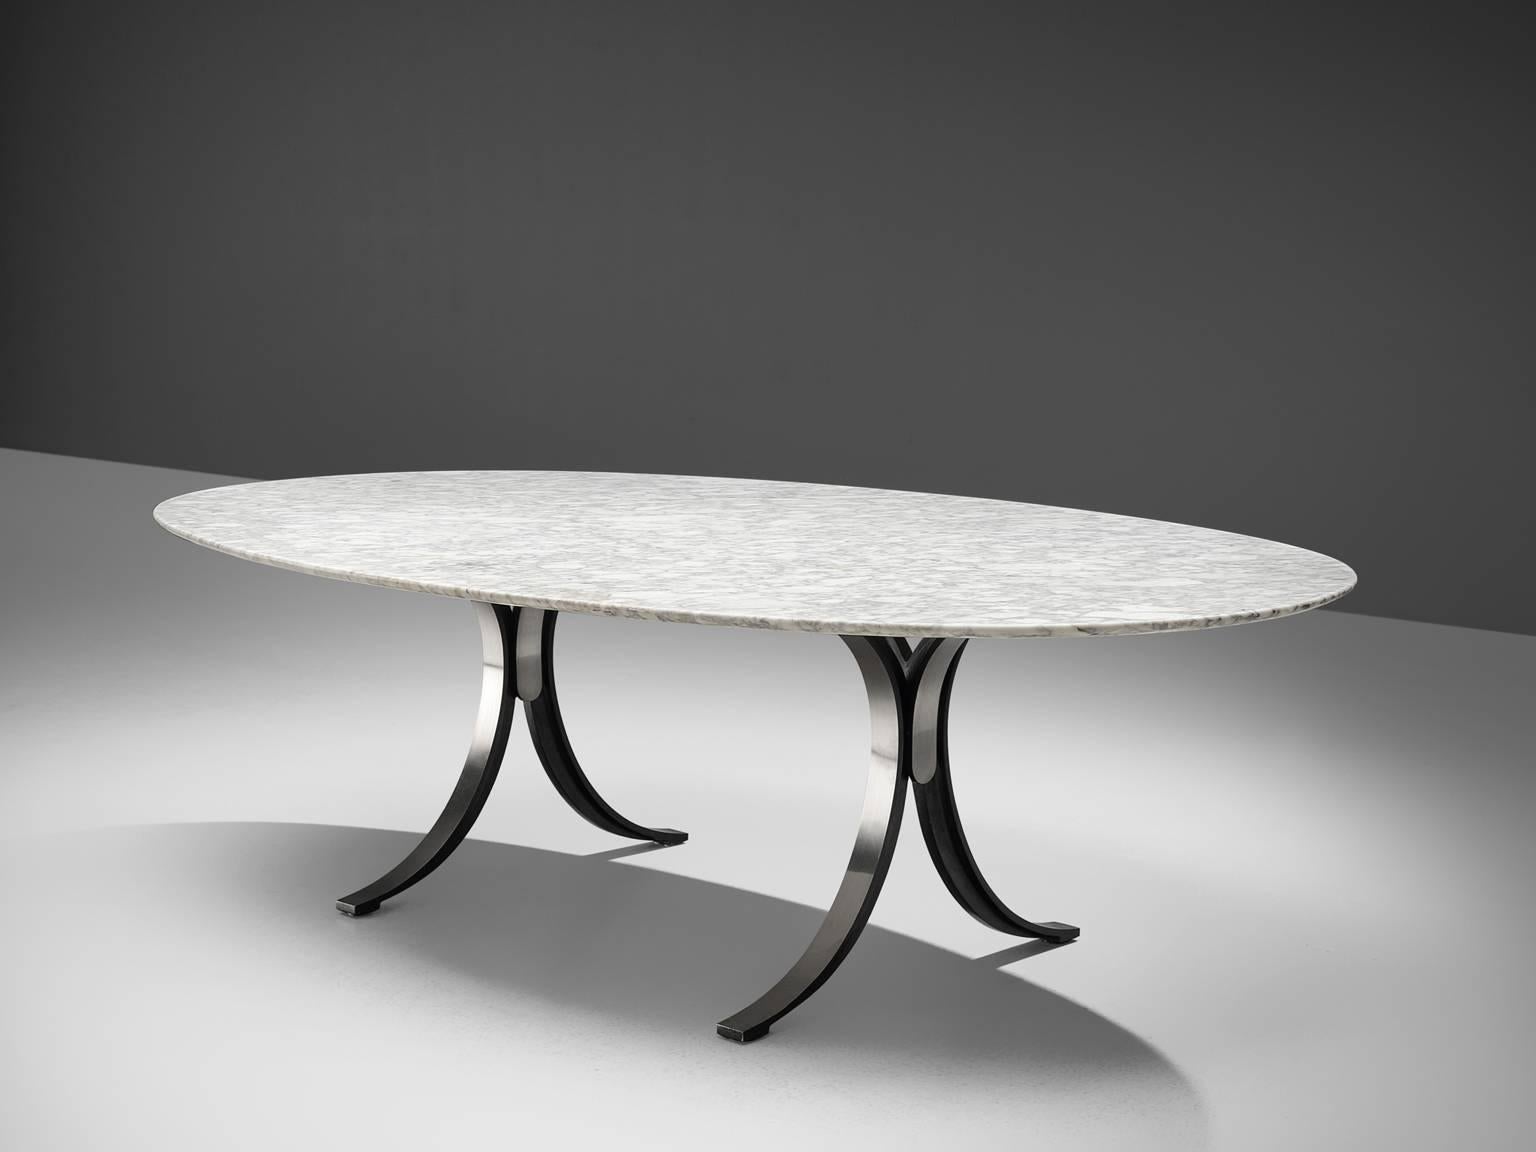 Osvaldo Borsani for Tecno, T 102 dining or conference table in Carrara marble and chrome plated steel, Italy, 1964. 

This elegant marble top shows an amazing grain in shades of grey and white with darker veins. The table has a marble top and